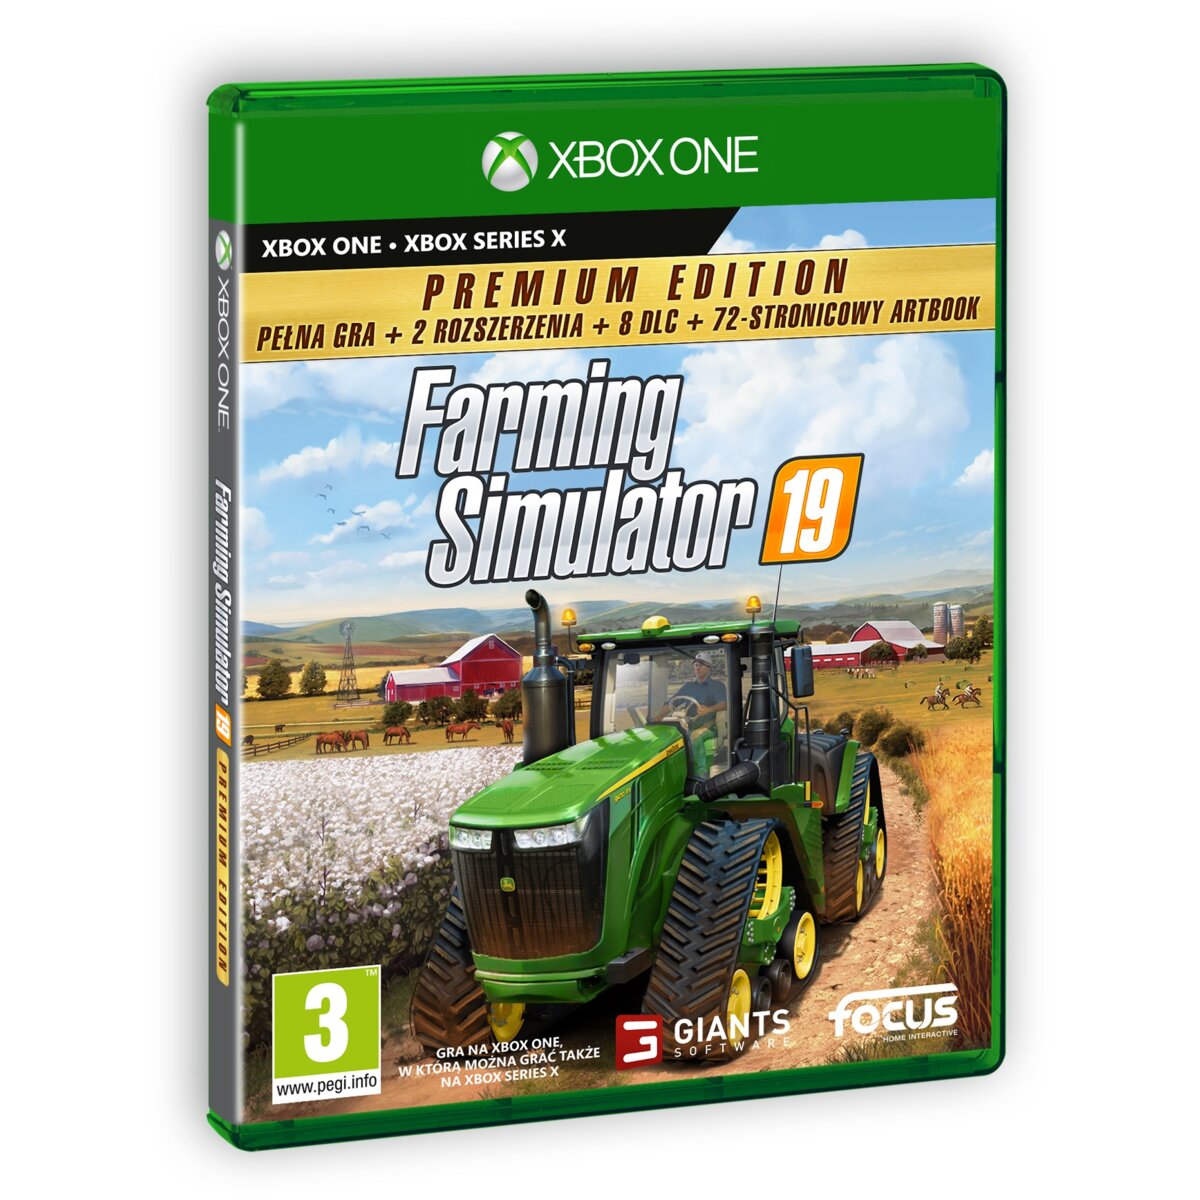 xbox one farming simulator 19 mods that generate the most money